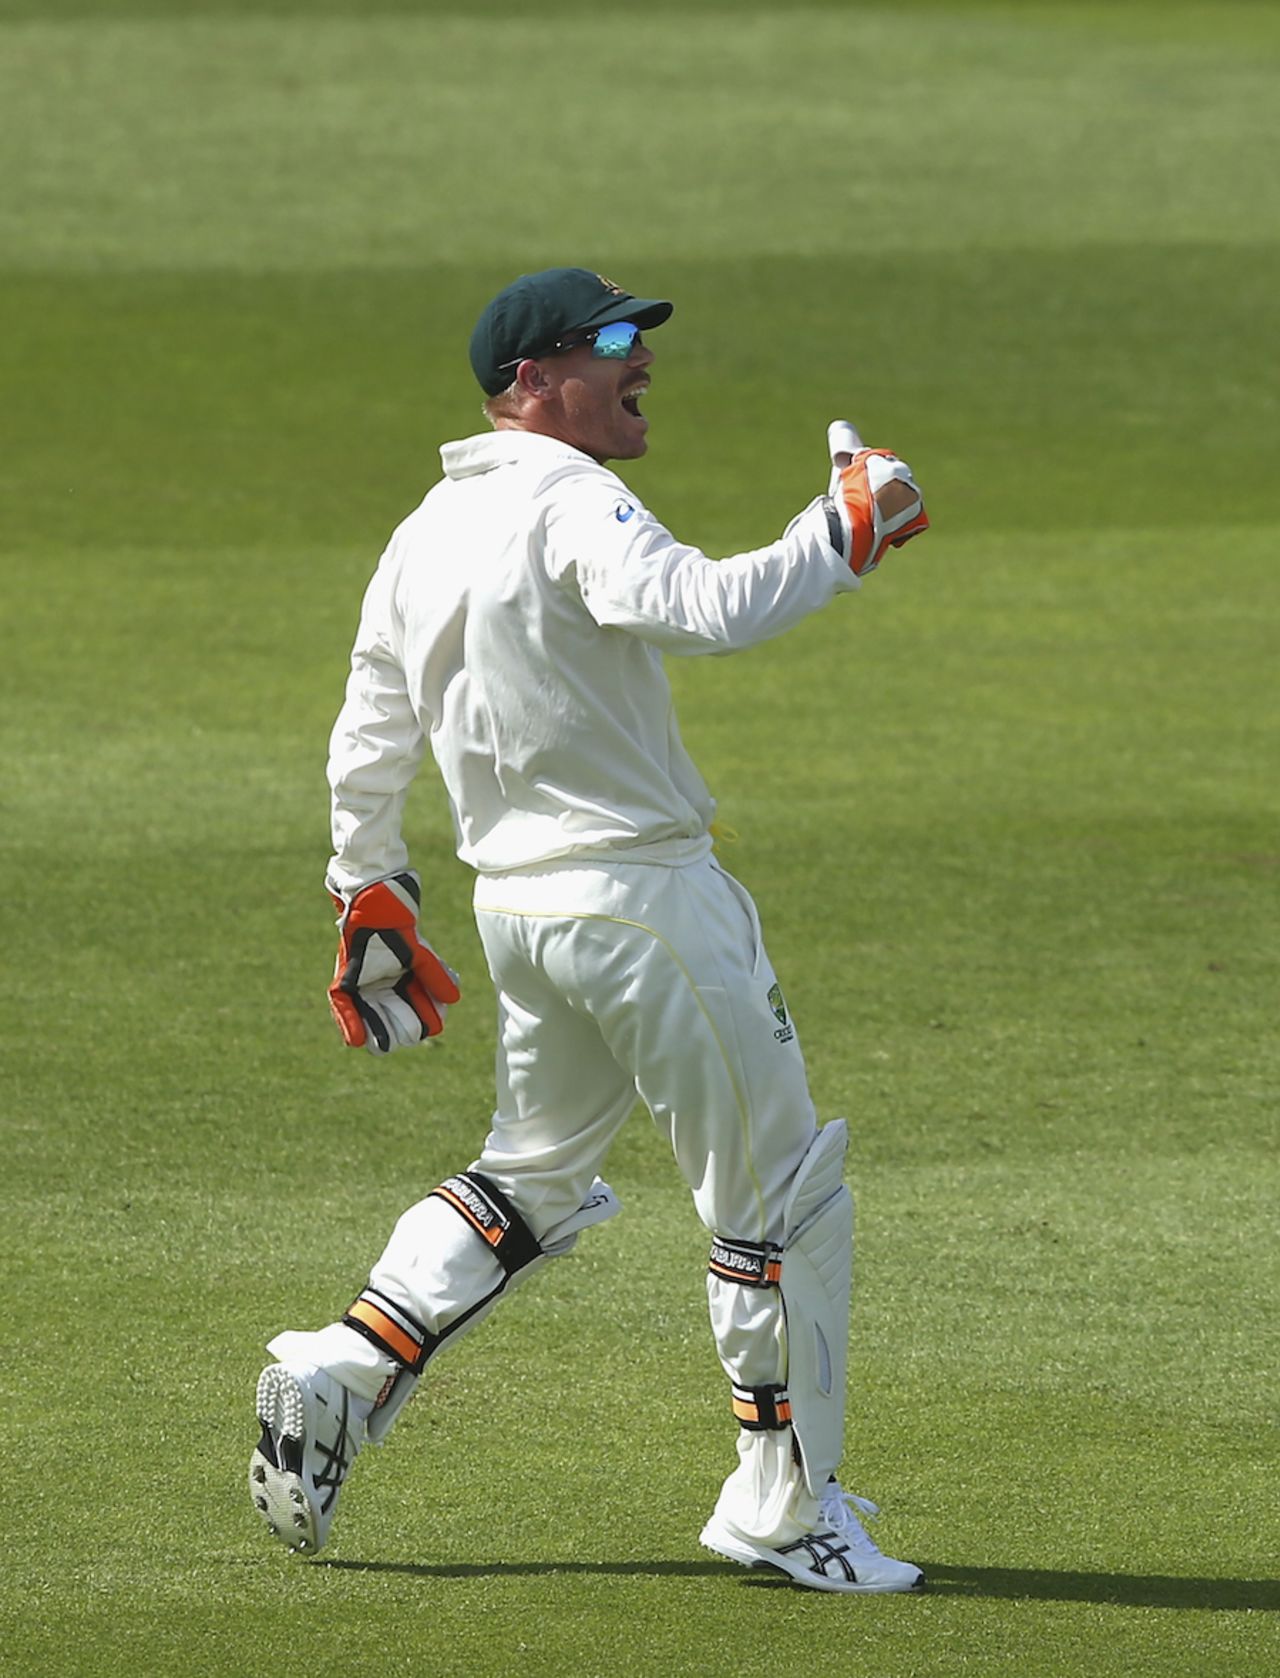 David Warner roars after taking a catch as wicketkeeper, Pakistan v Australia, 2nd Test, Abu Dhabi, 2nd day, October 31, 2014